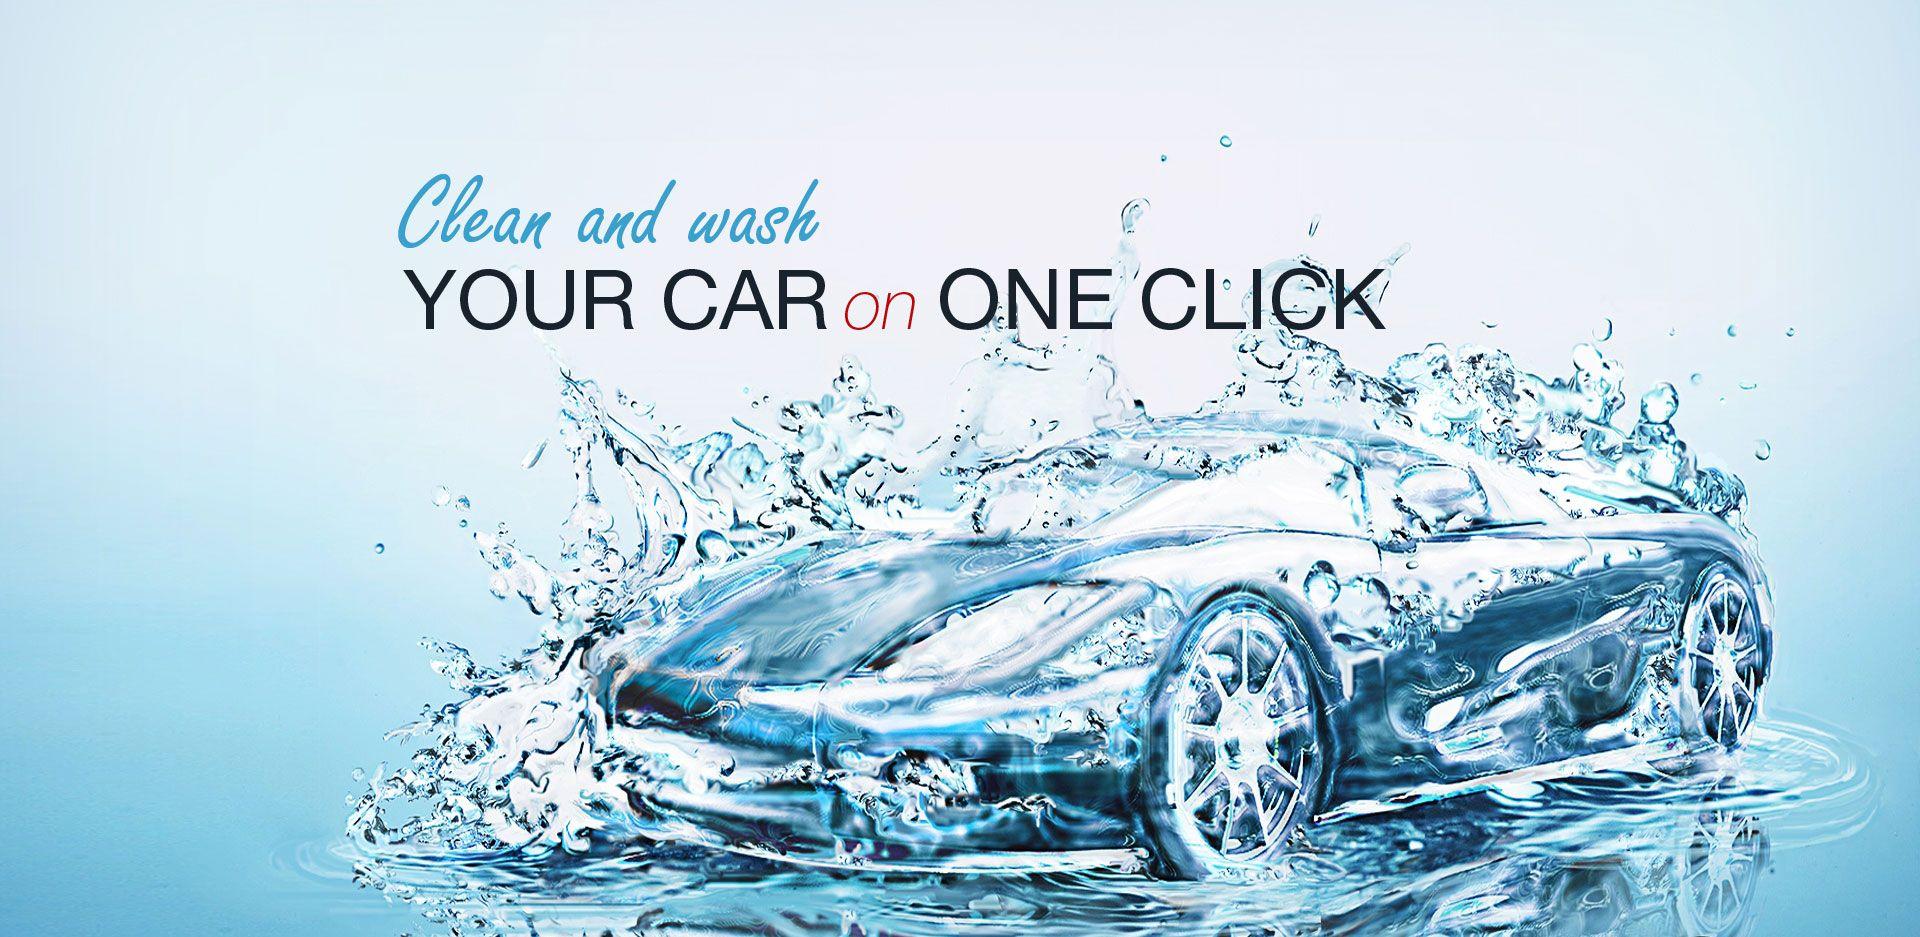 Car wash App and Website for Android and iOS